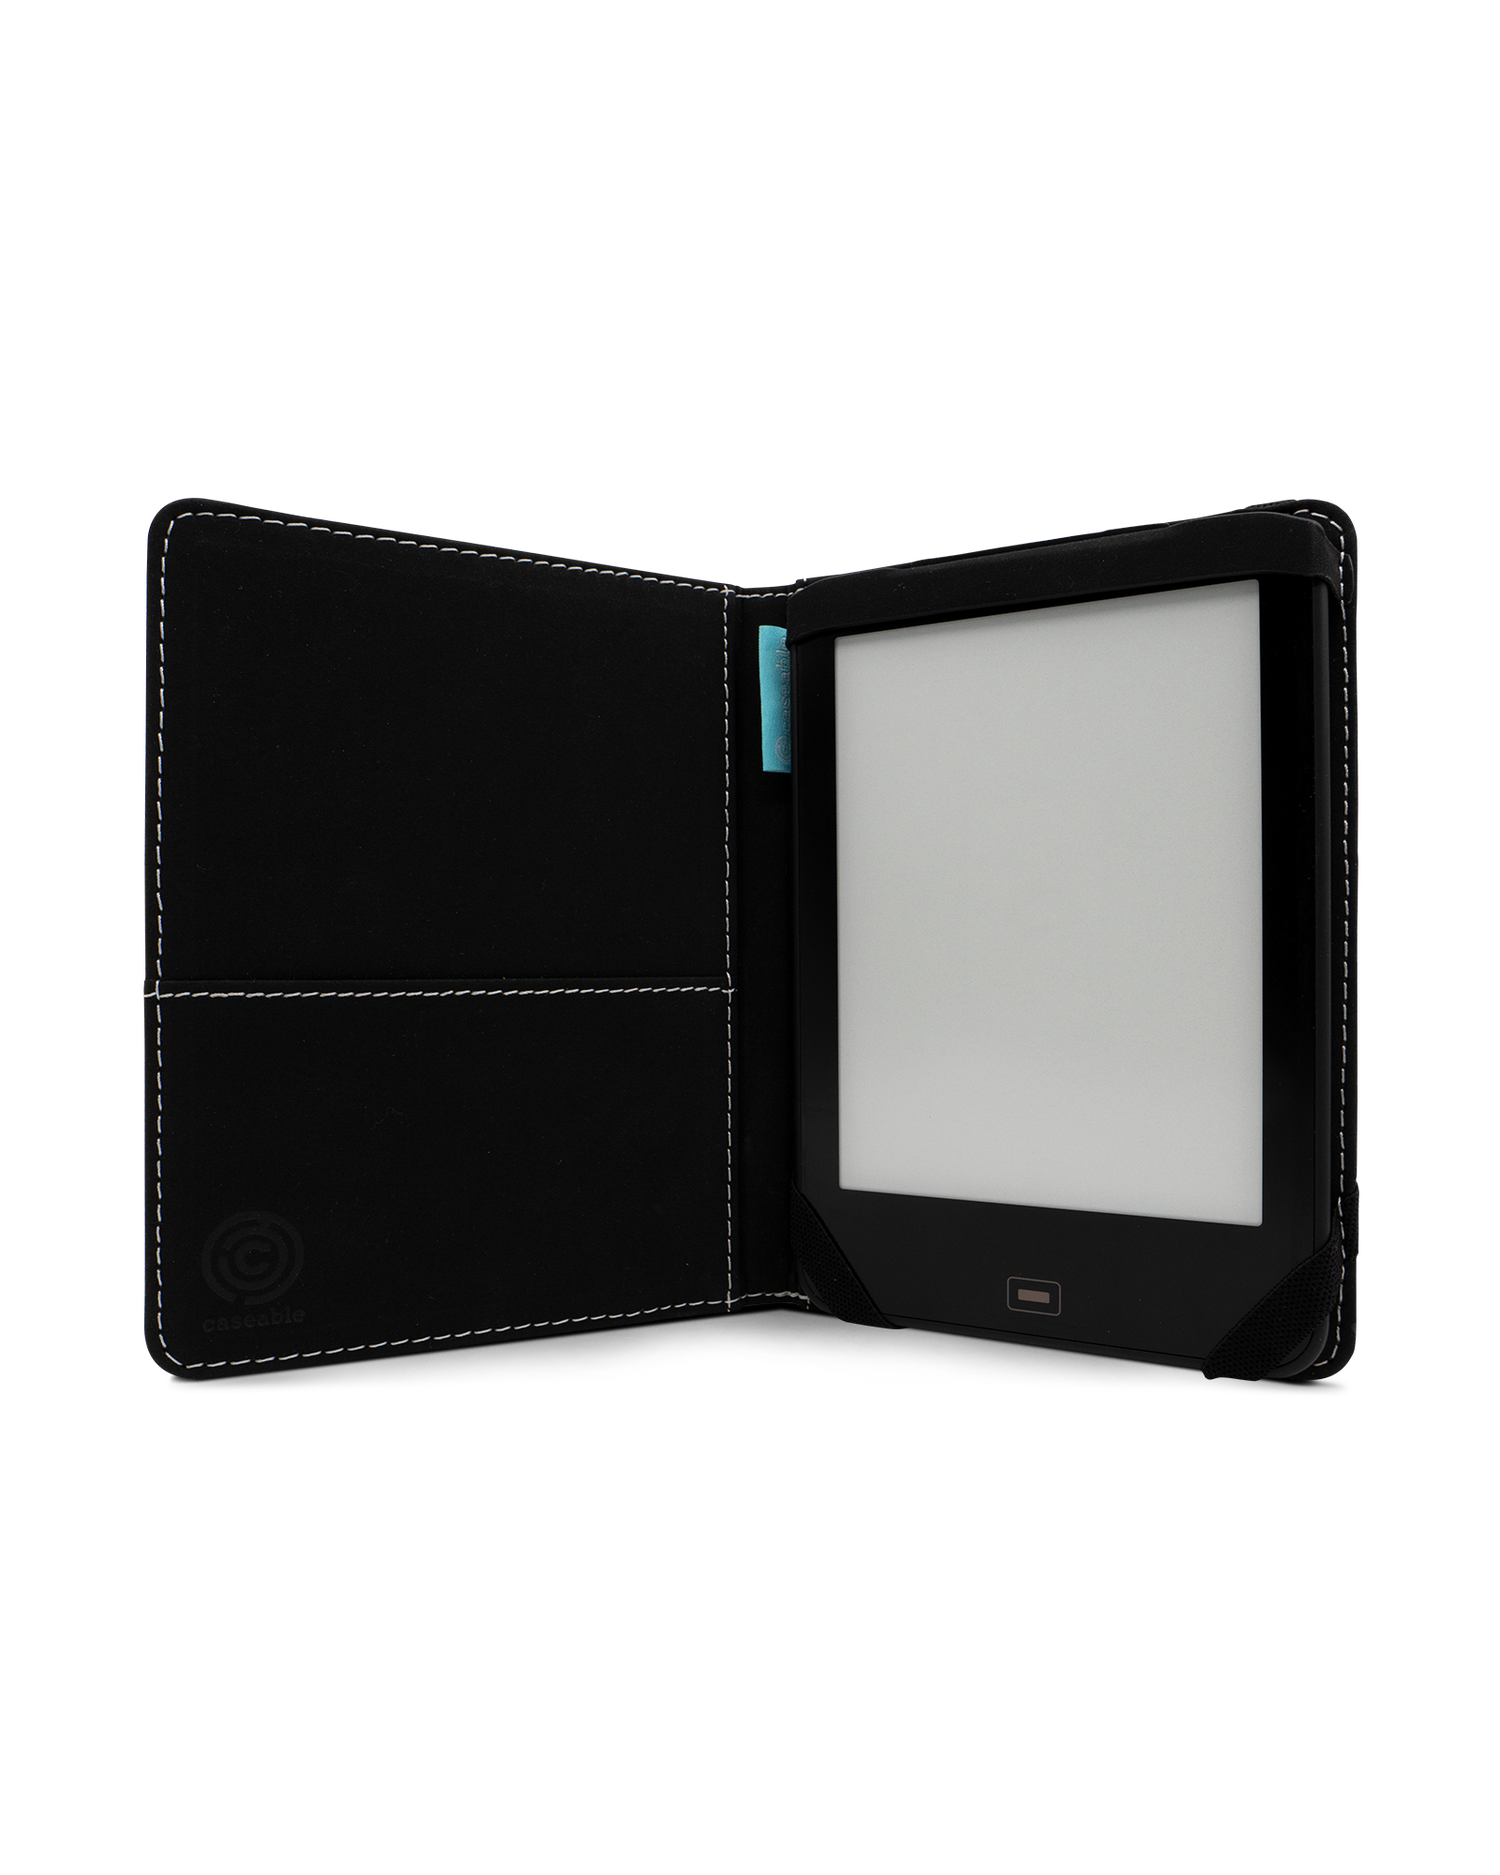 Geometric Camo Blue eReader Case for tolino vision 1 to 4 HD: Opened interior view